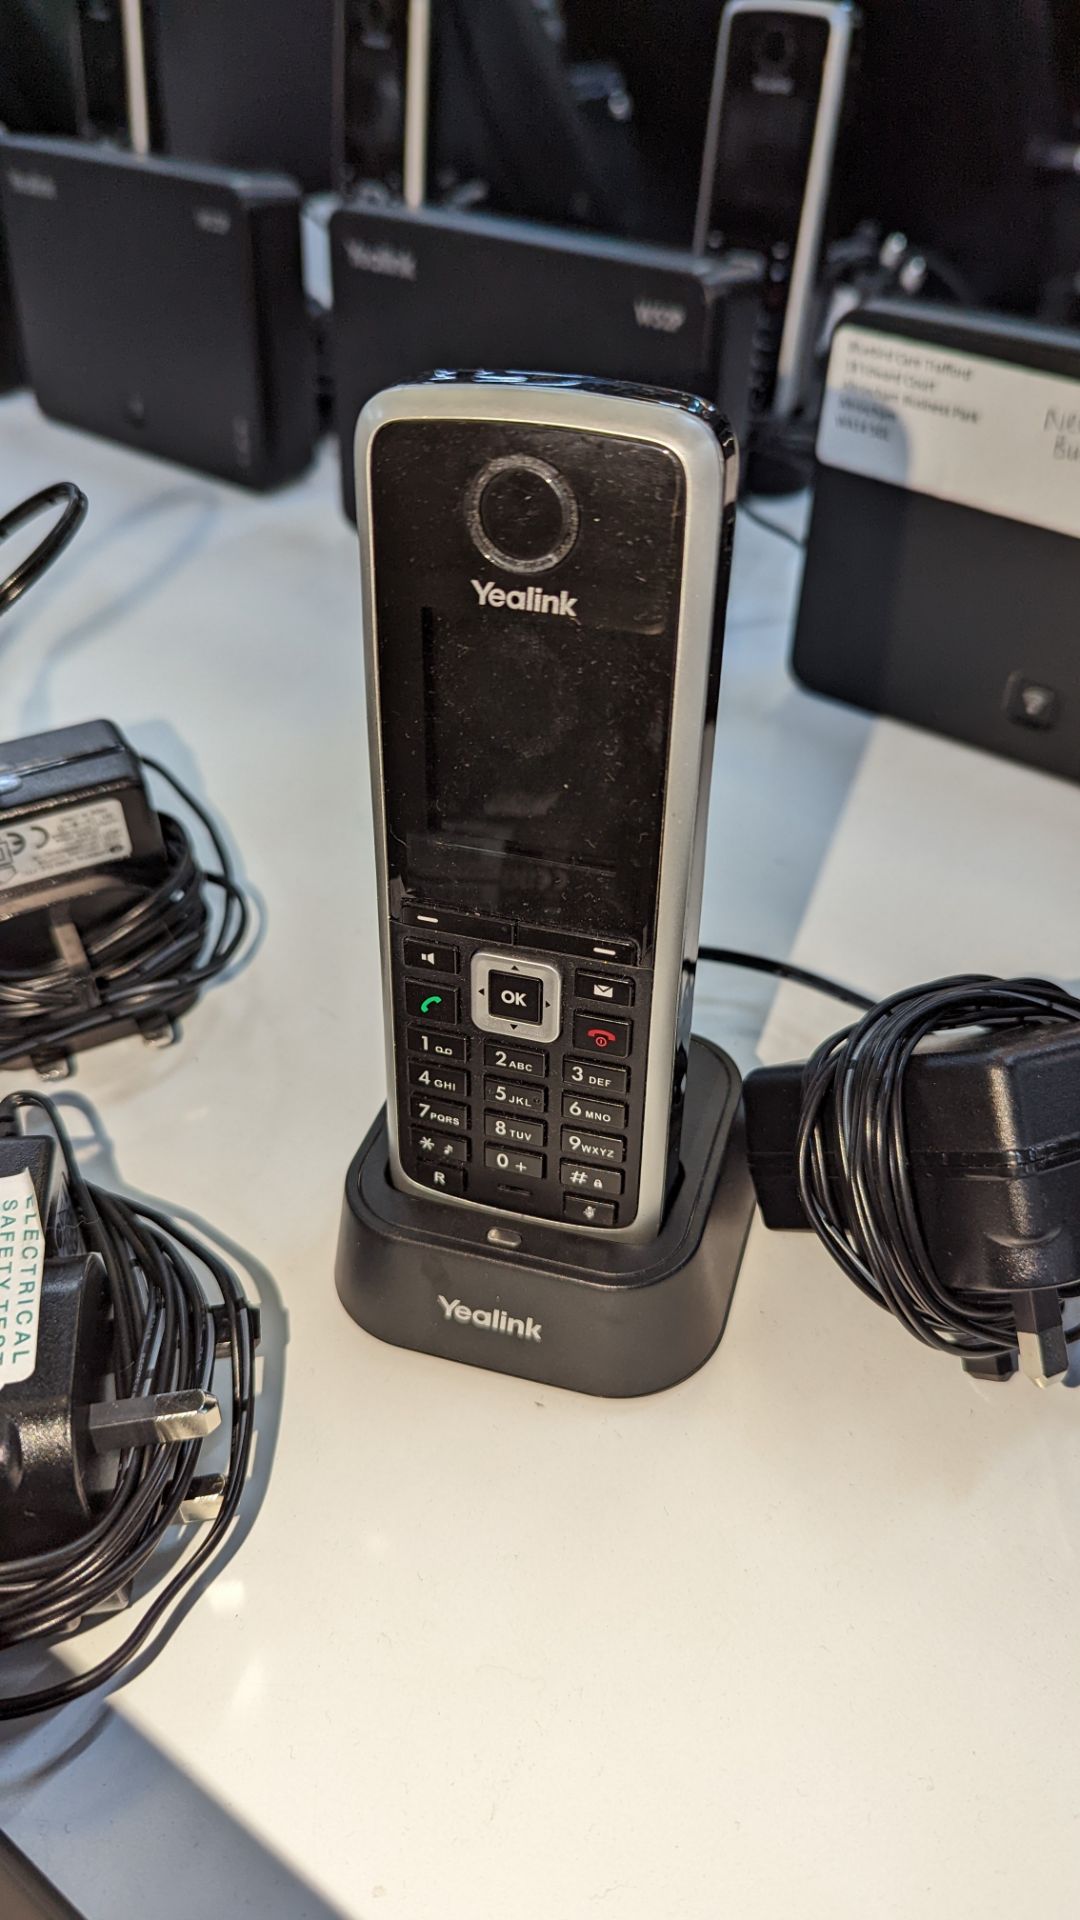 4 off Yealink model W52P wireless deck telephone handsets, each handset including a base station wit - Image 7 of 7